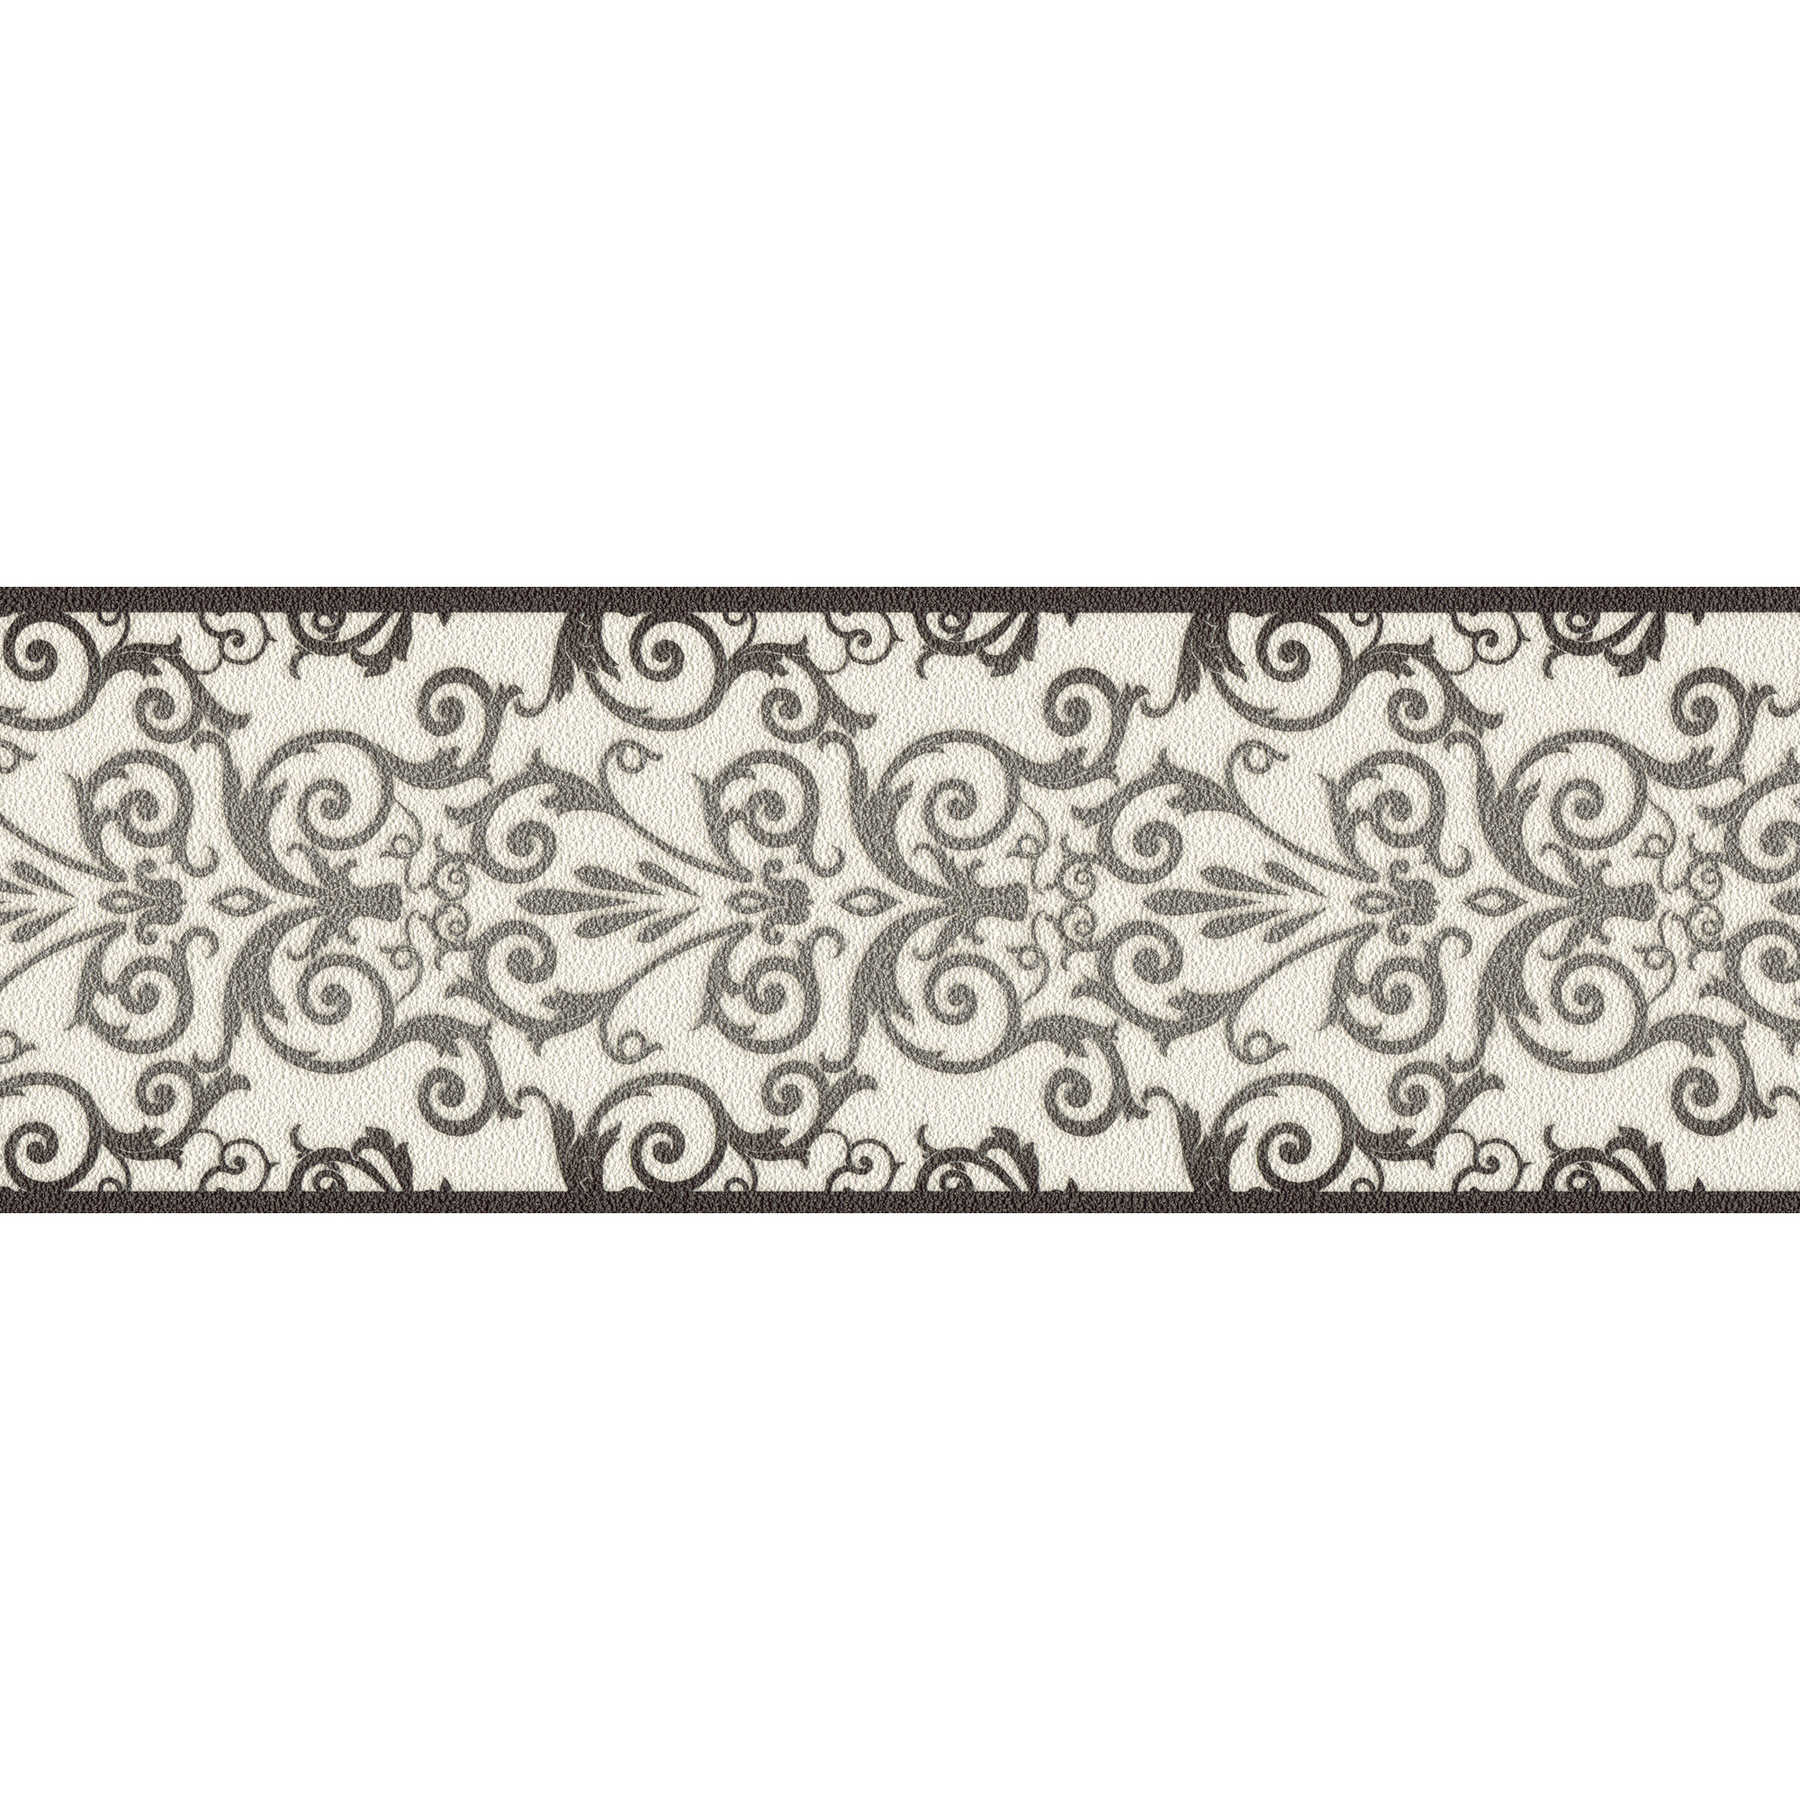 Black and white ornament border with metallic effect
